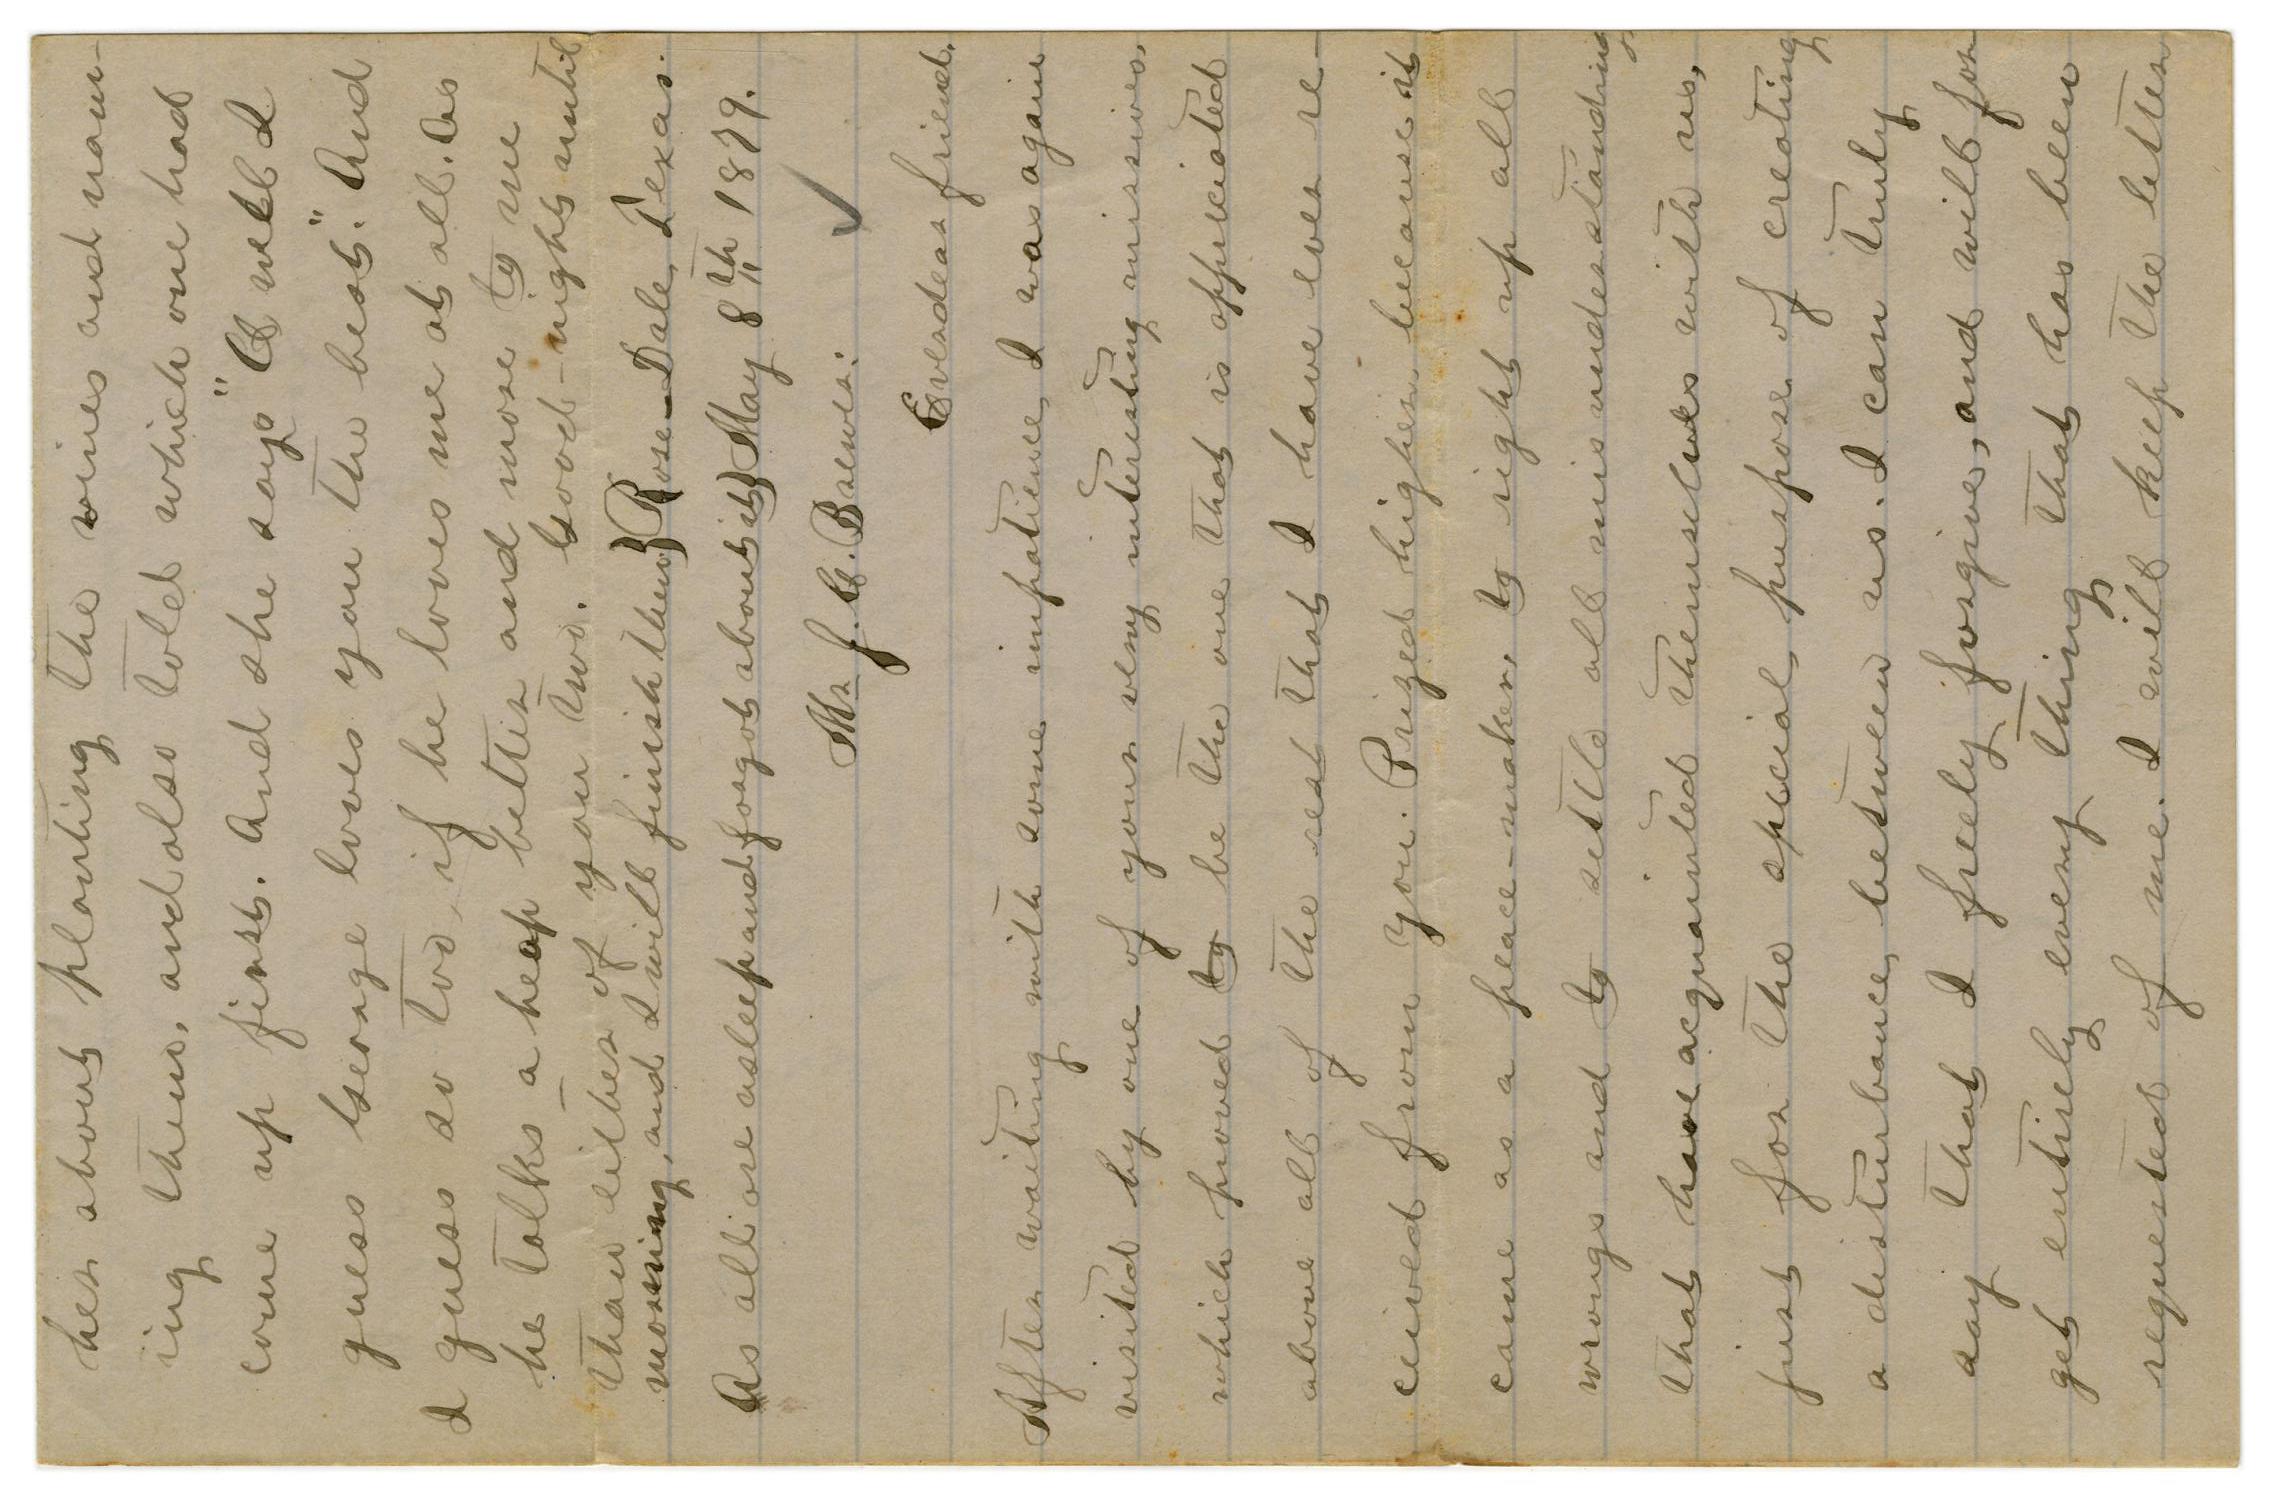 [Letter from Emma Davis to John C. Brewer, May 8, 1879]
                                                
                                                    [Sequence #]: 1 of 6
                                                